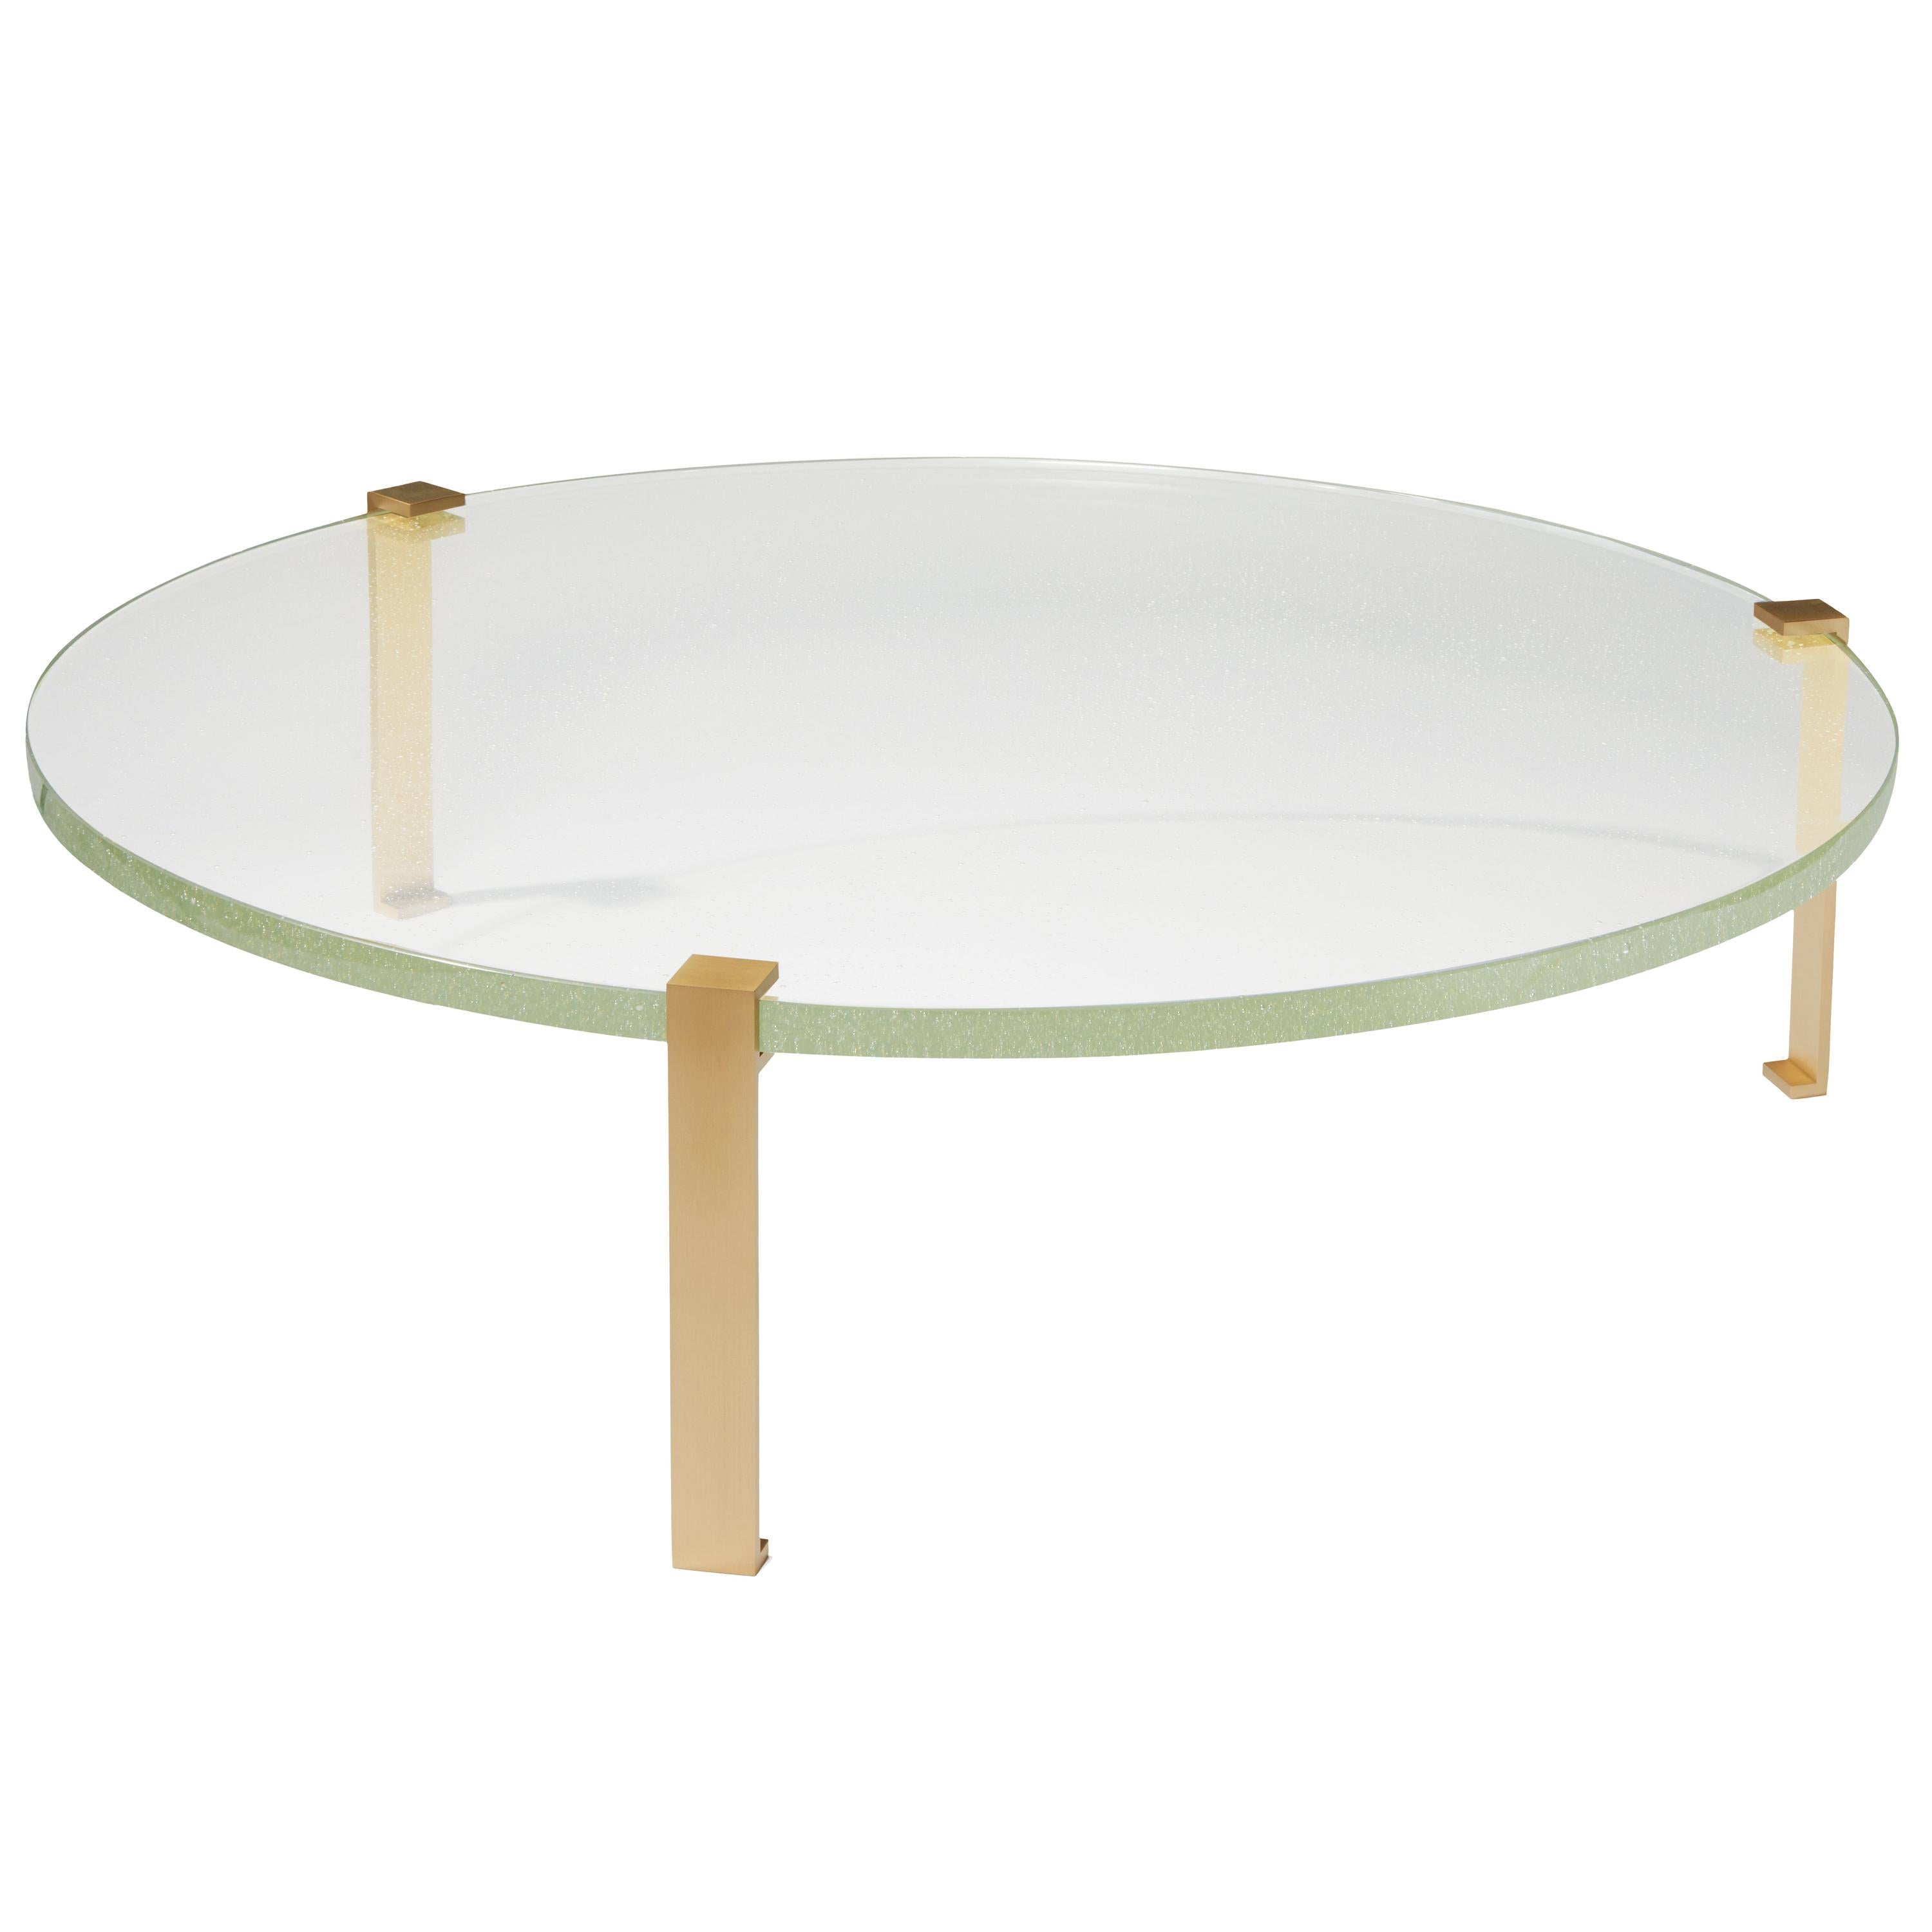 Round Glass Coffee Table Gemme by Hervé Langlais and Perrin & Perrin